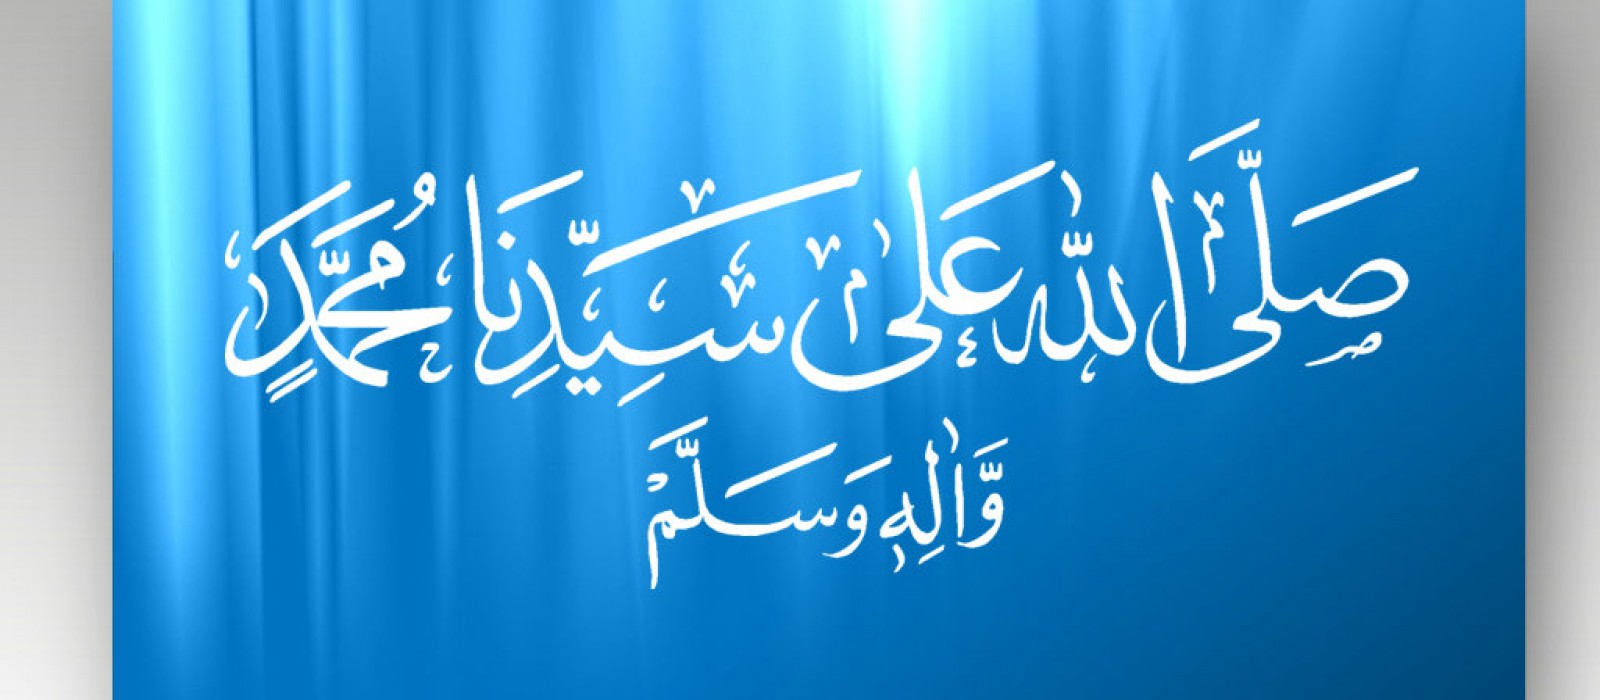 Most Beautiful Islamic Quotes HD Wallpaper Pictures Desktop